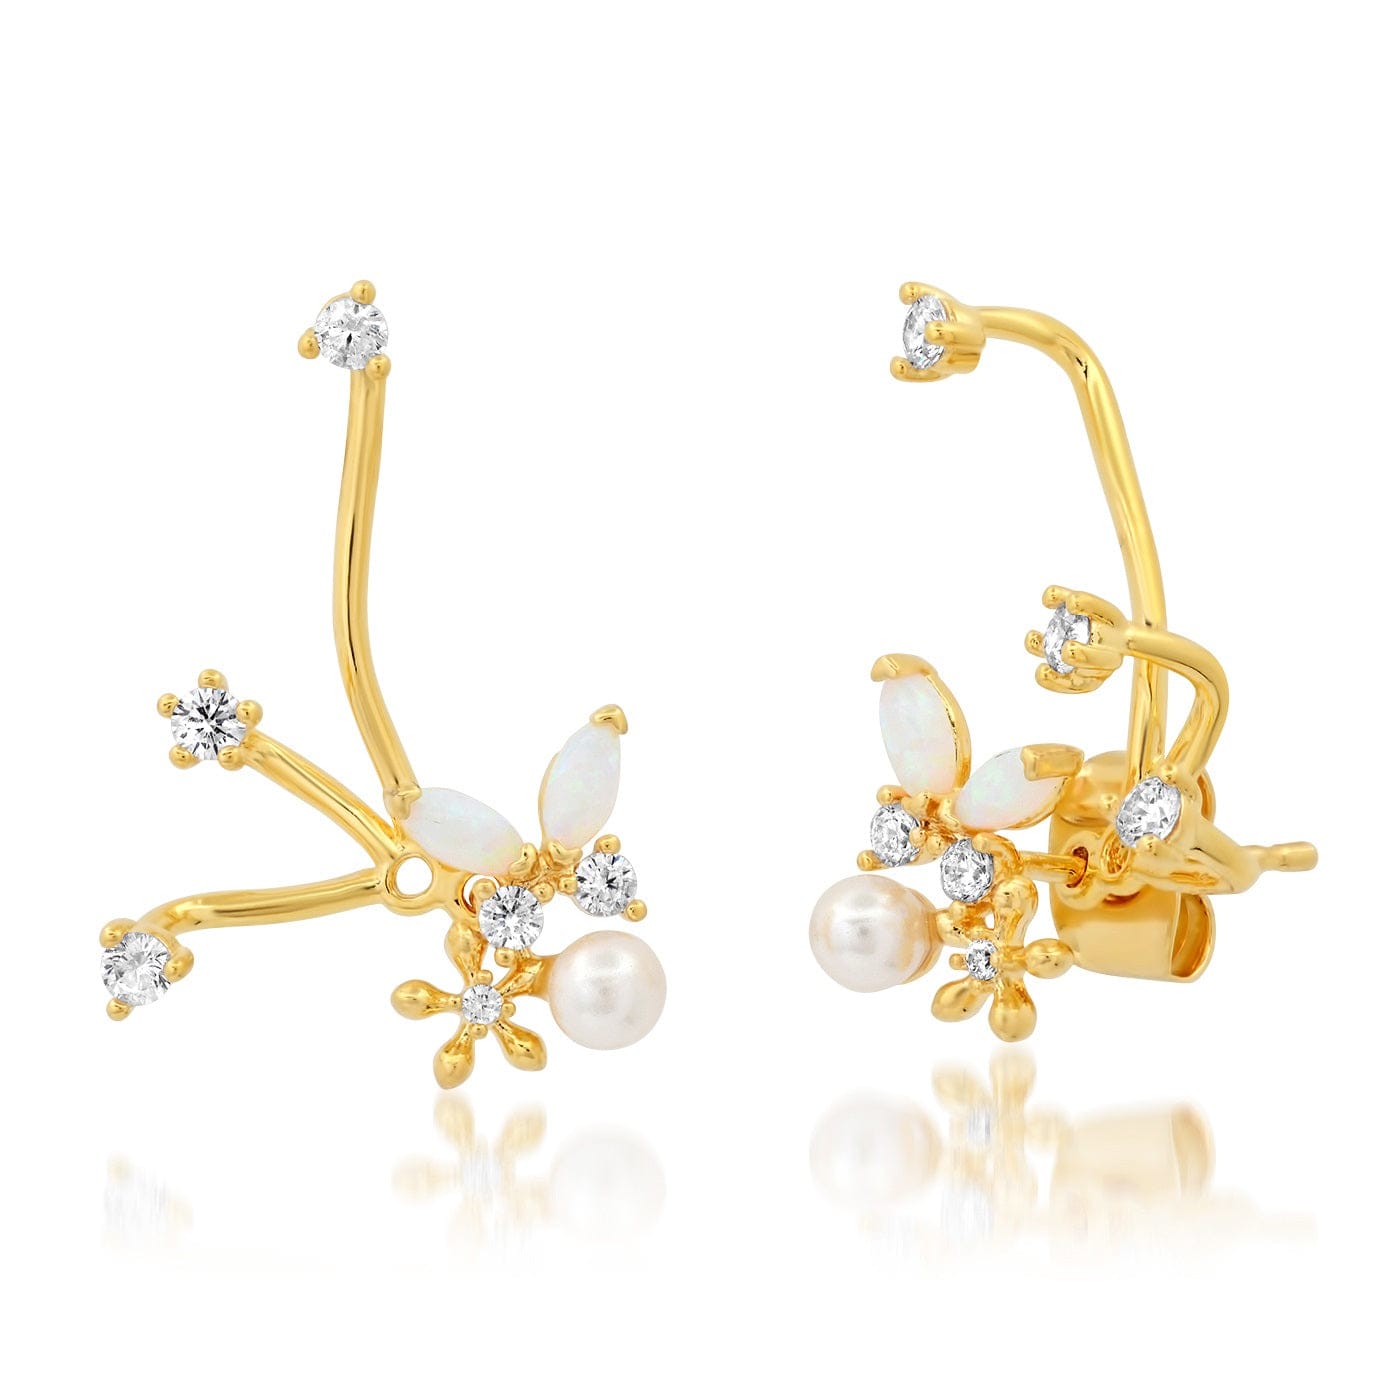 TAI JEWELRY Earrings Flower And Pearl Jacket Climber